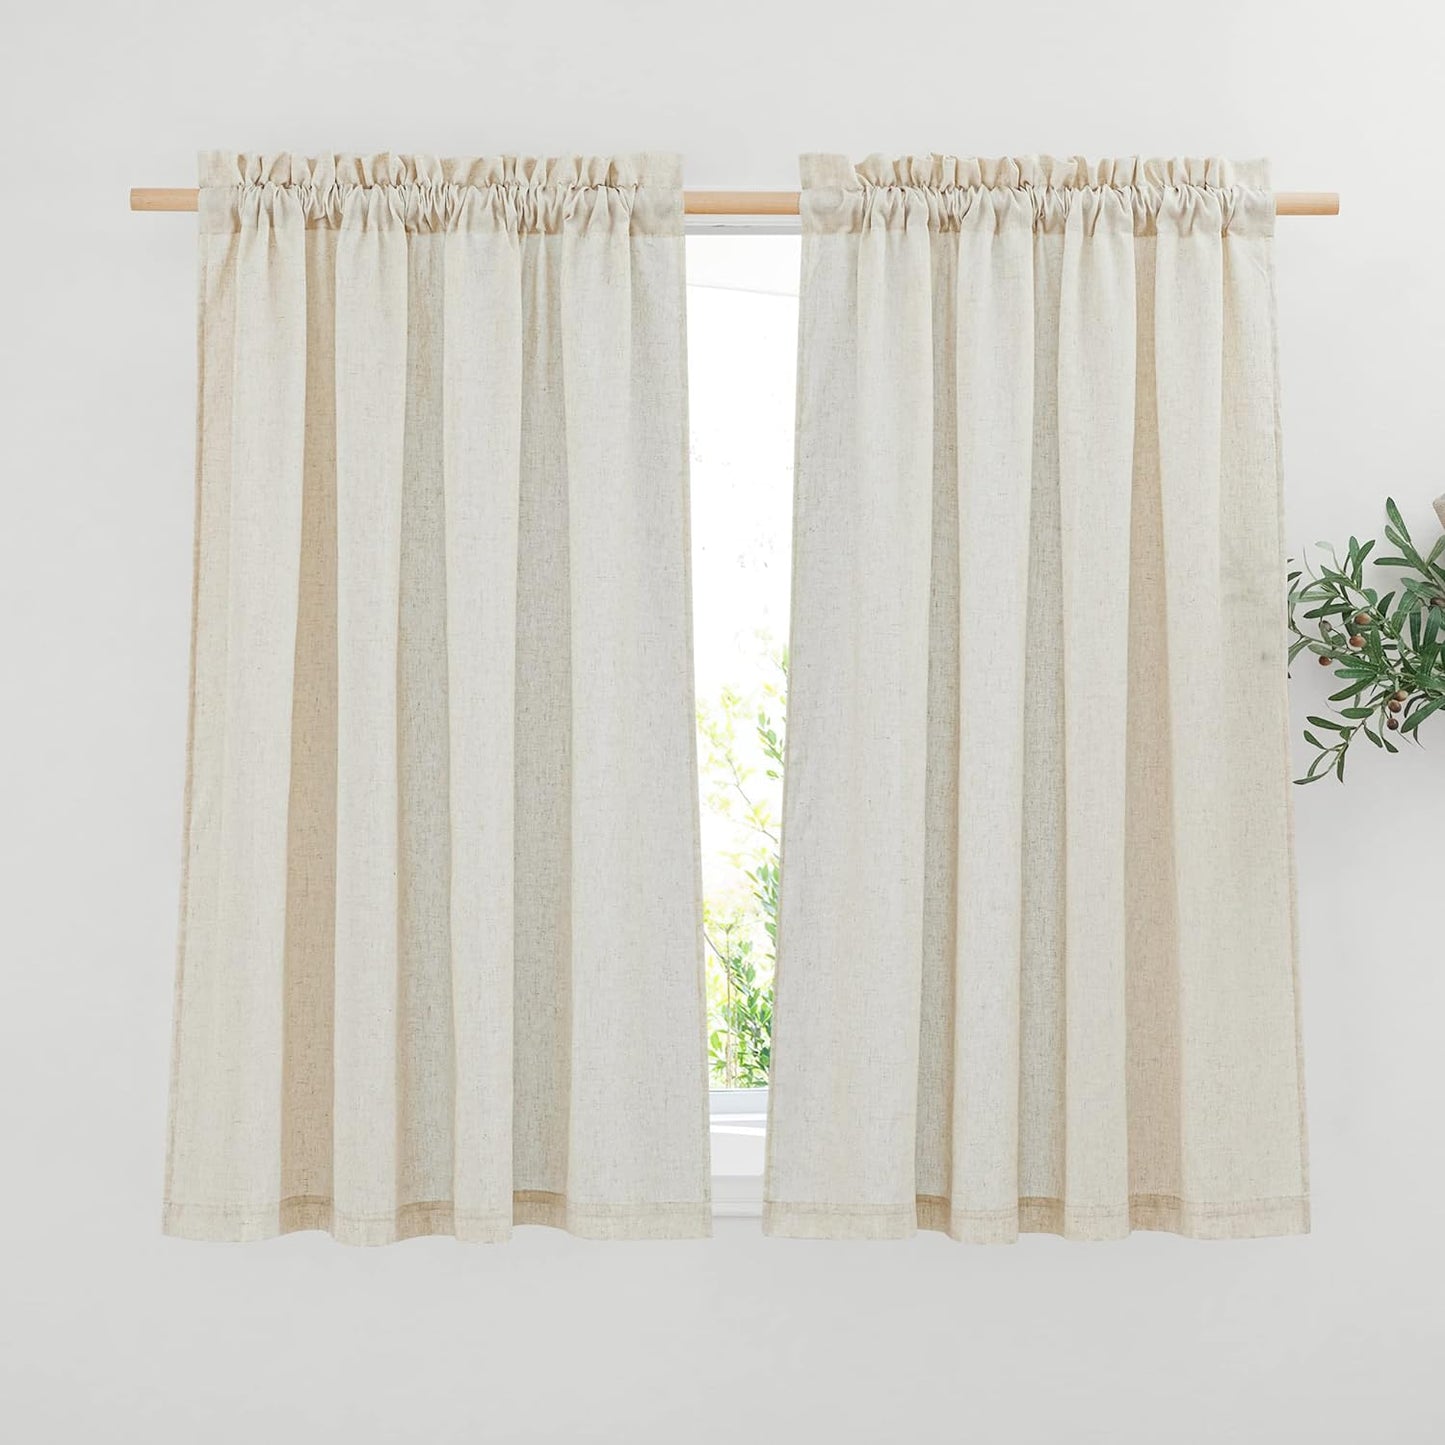 NICETOWN Natural Linen Curtains & Drapes for Windows 84 Inch Long, Rod Pocket Thick Flax Semi Sheer Privacy Assured with Light Filtering for Bedroom/Living Room, W55 X L84, 2 Pieces  NICETOWN Natural W55 X L45 